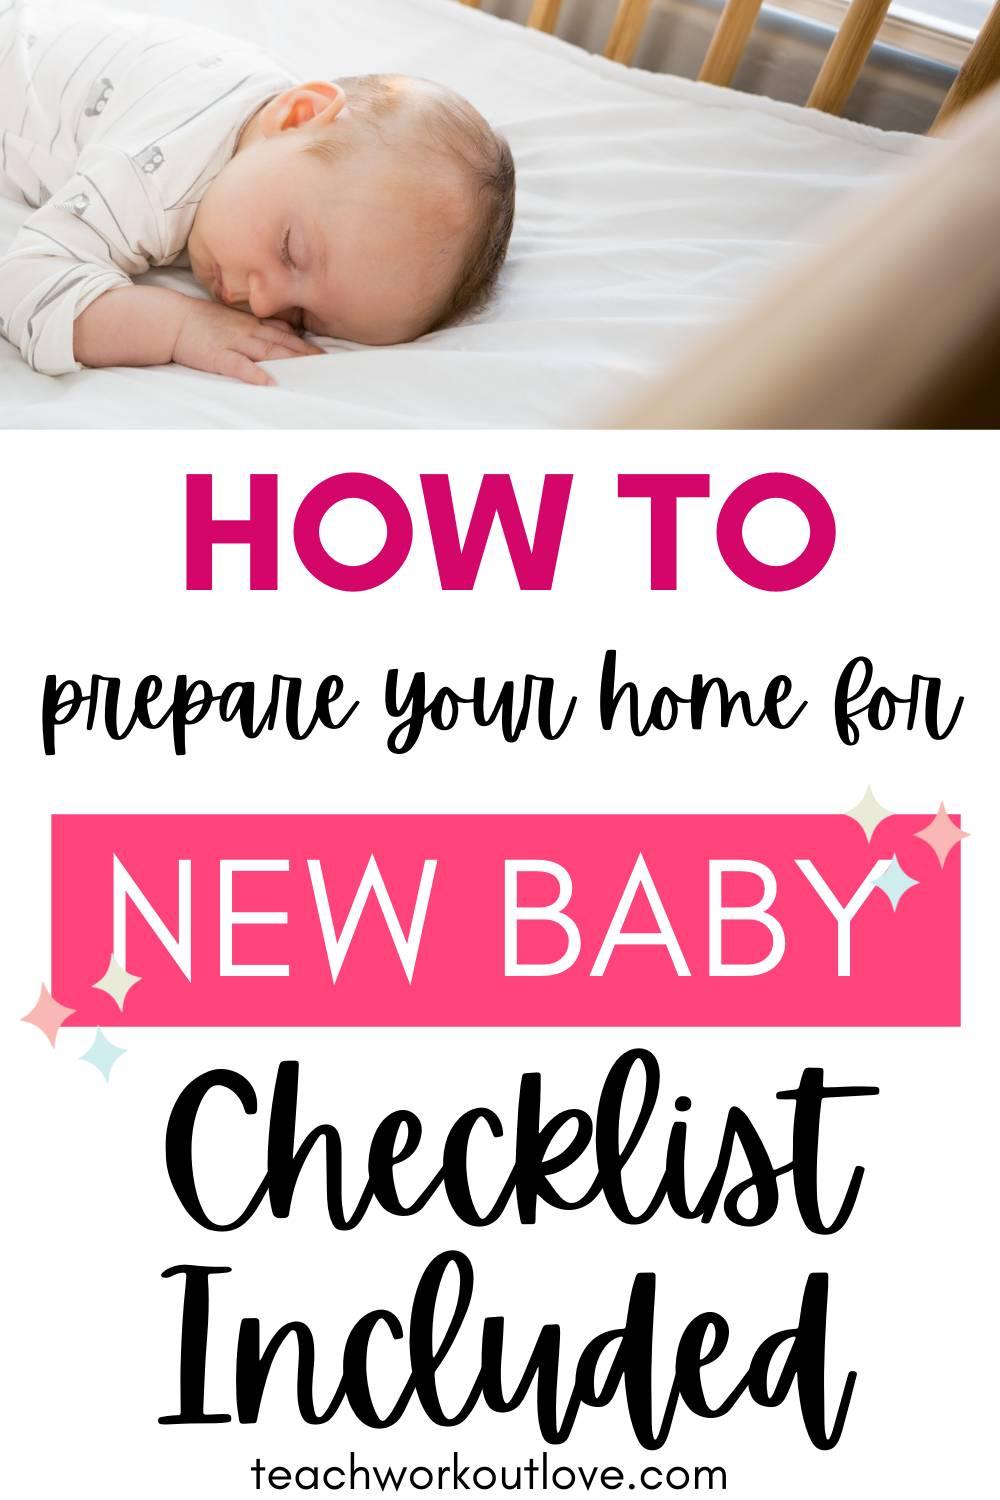 Have a new baby on the way? We have some tips for how to prepare your home for a newborn and a checklist to copy and paste.